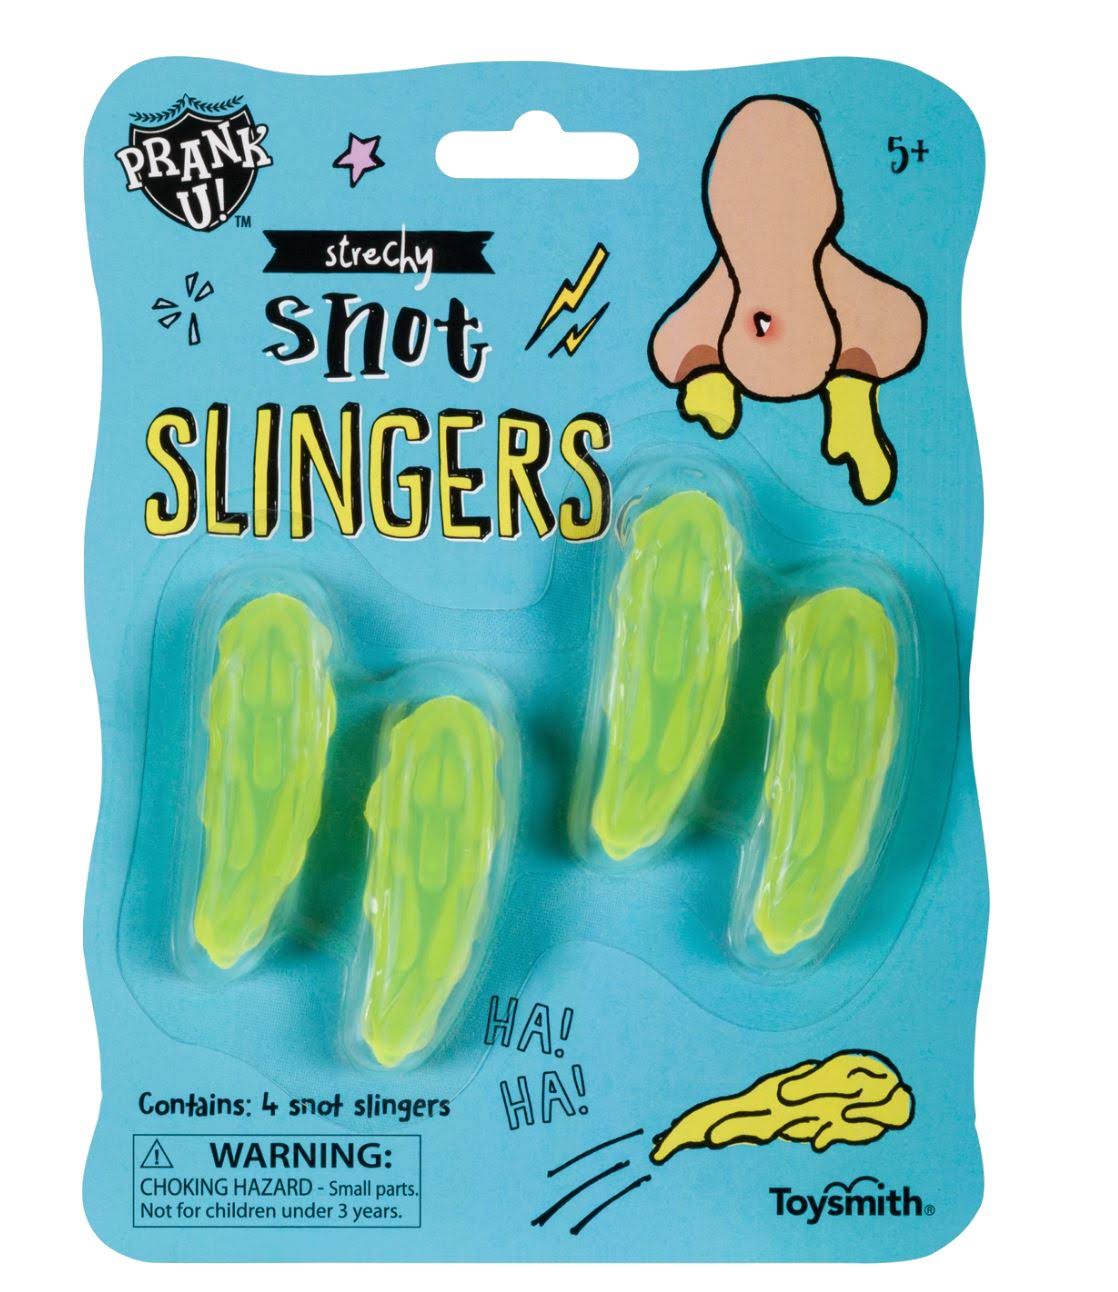 Stretchy Snot Slingers, Prank Toy, Finger Flicking Fun